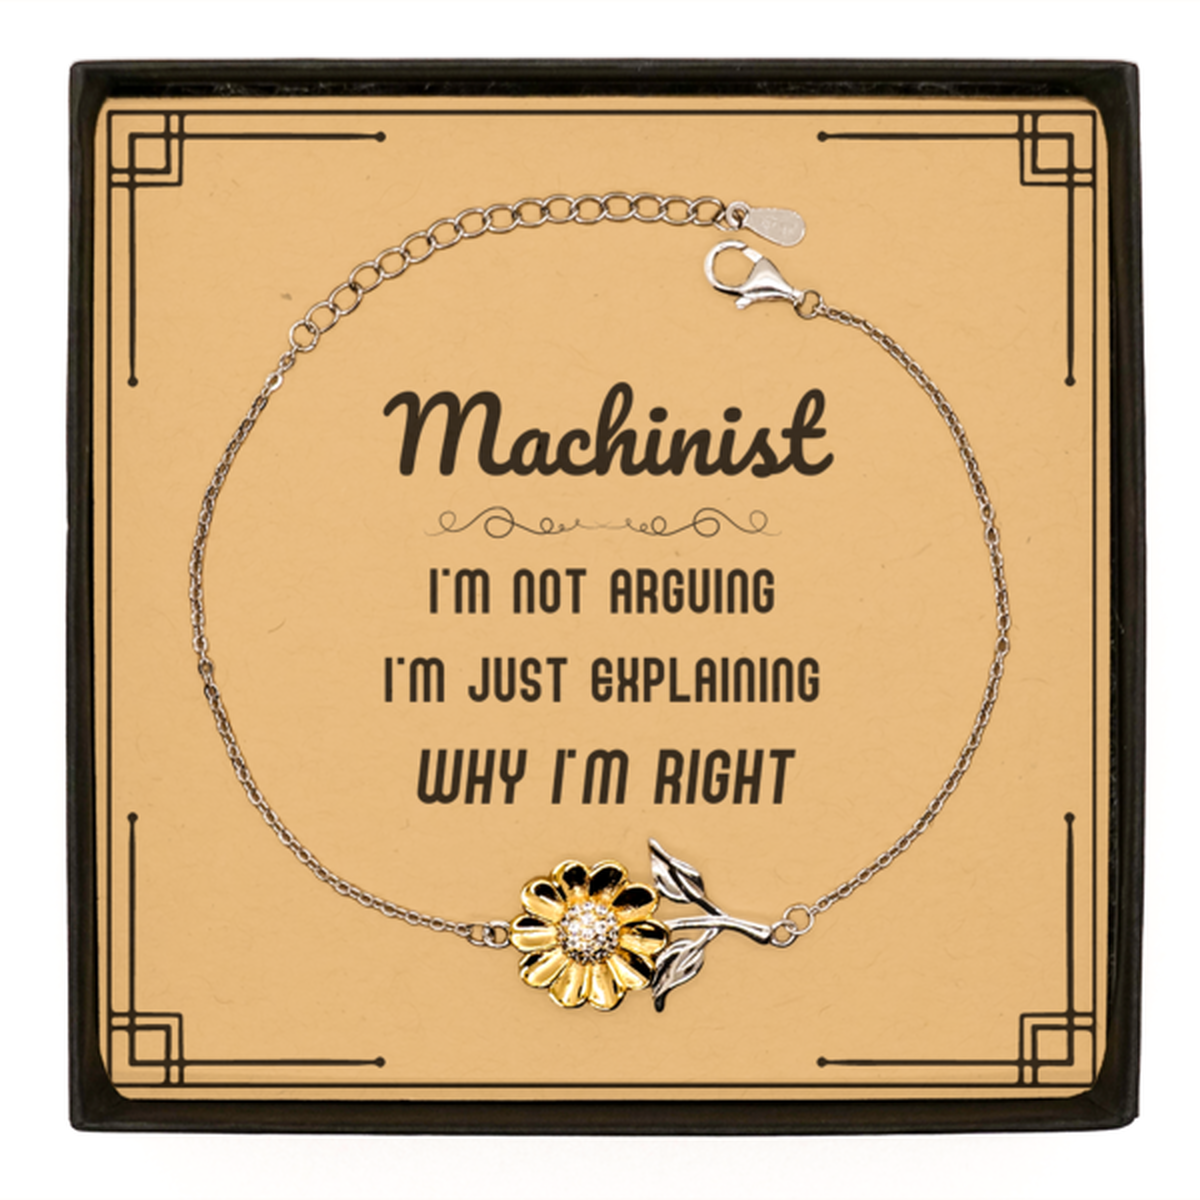 Machinist I'm not Arguing. I'm Just Explaining Why I'm RIGHT Sunflower Bracelet, Funny Saying Quote Machinist Gifts For Machinist Message Card Graduation Birthday Christmas Gifts for Men Women Coworker